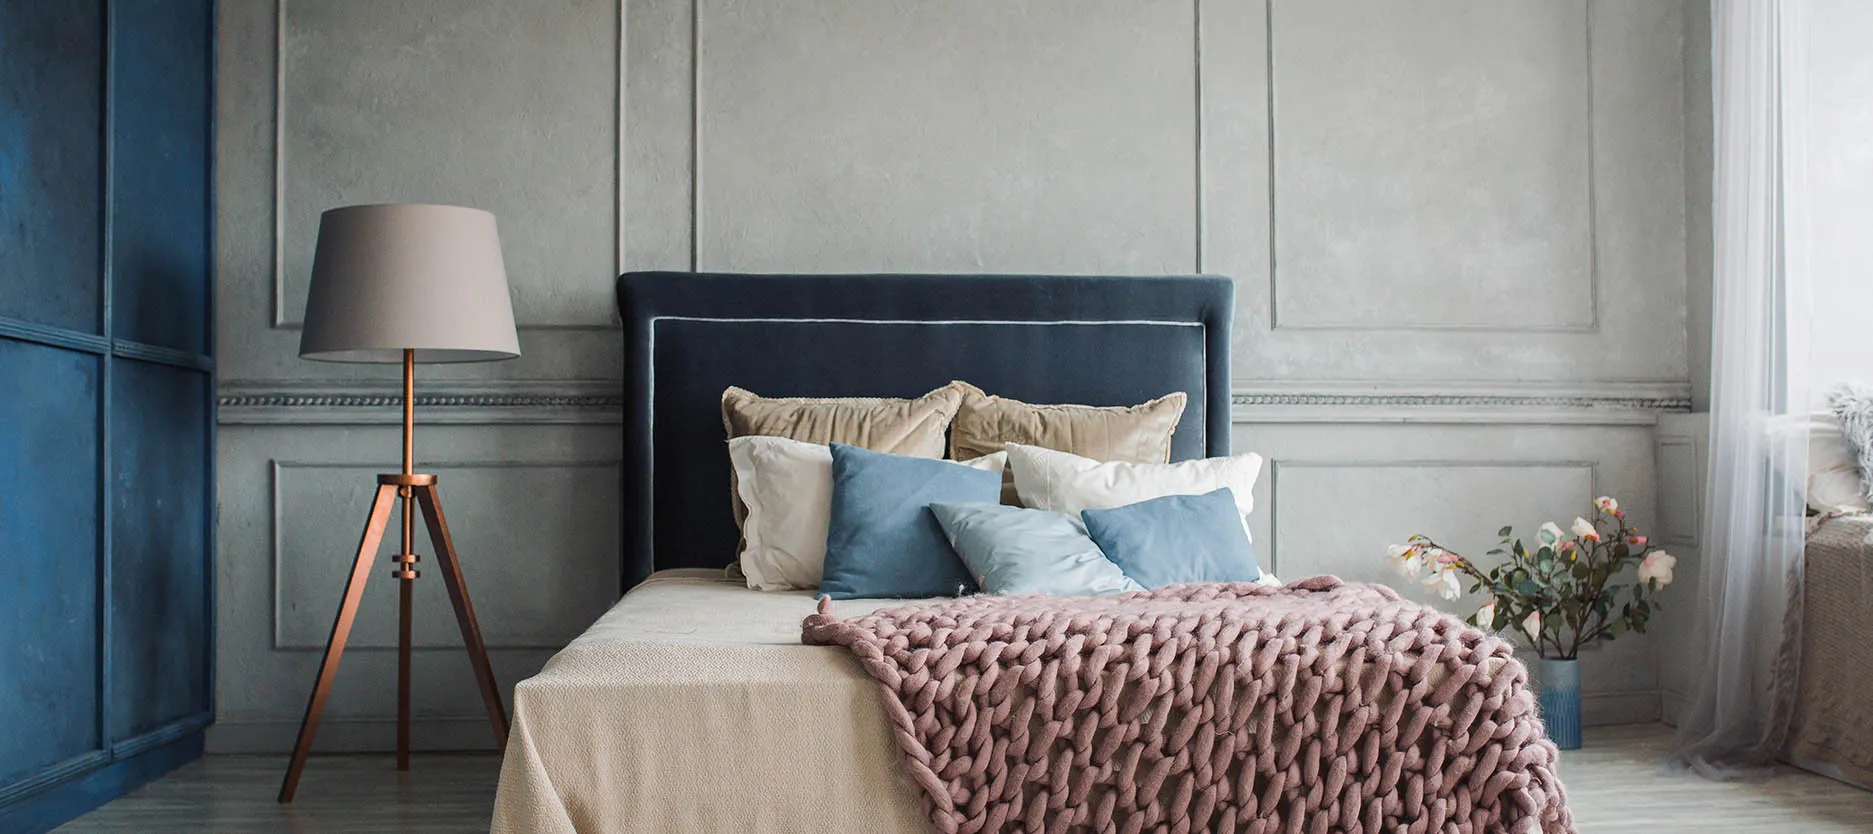 Icy blue and stone grey two colour combination for bedroom walls